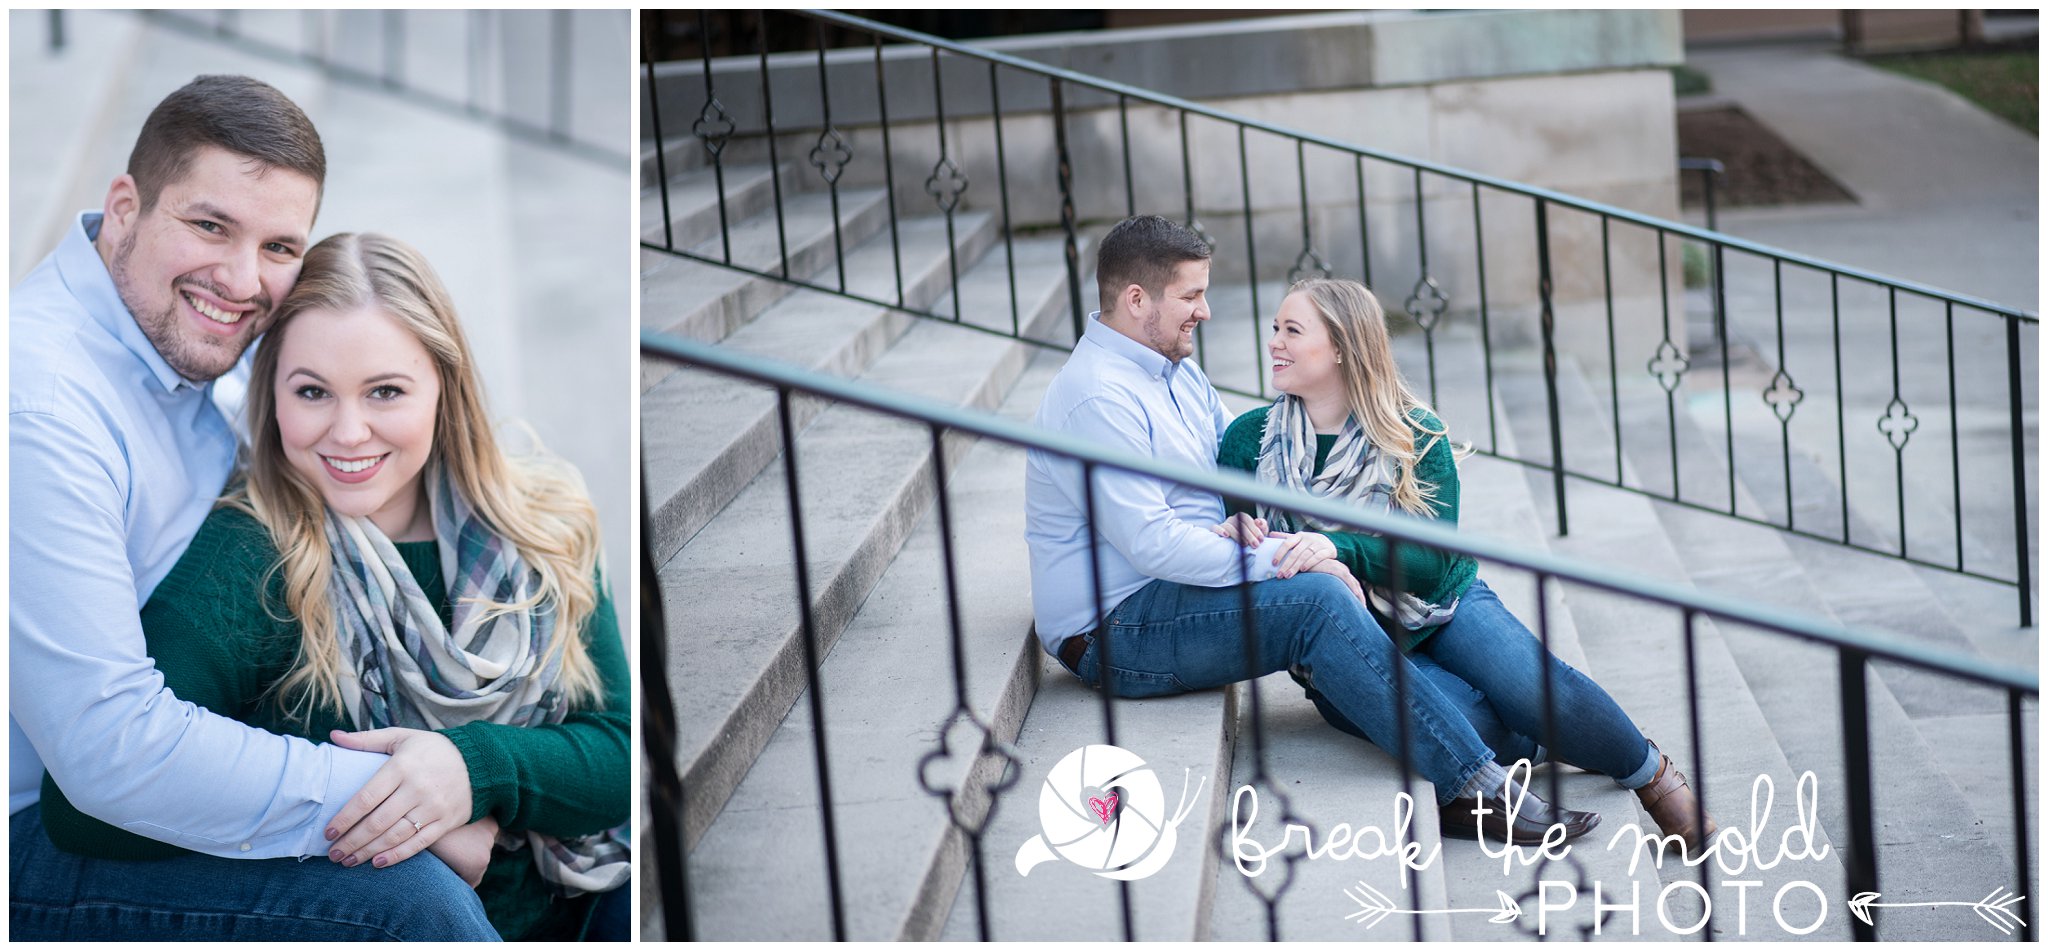 break-the-mold-photo-engagement-session-downtown-knoxville-try-before-you-buy_9864.jpg